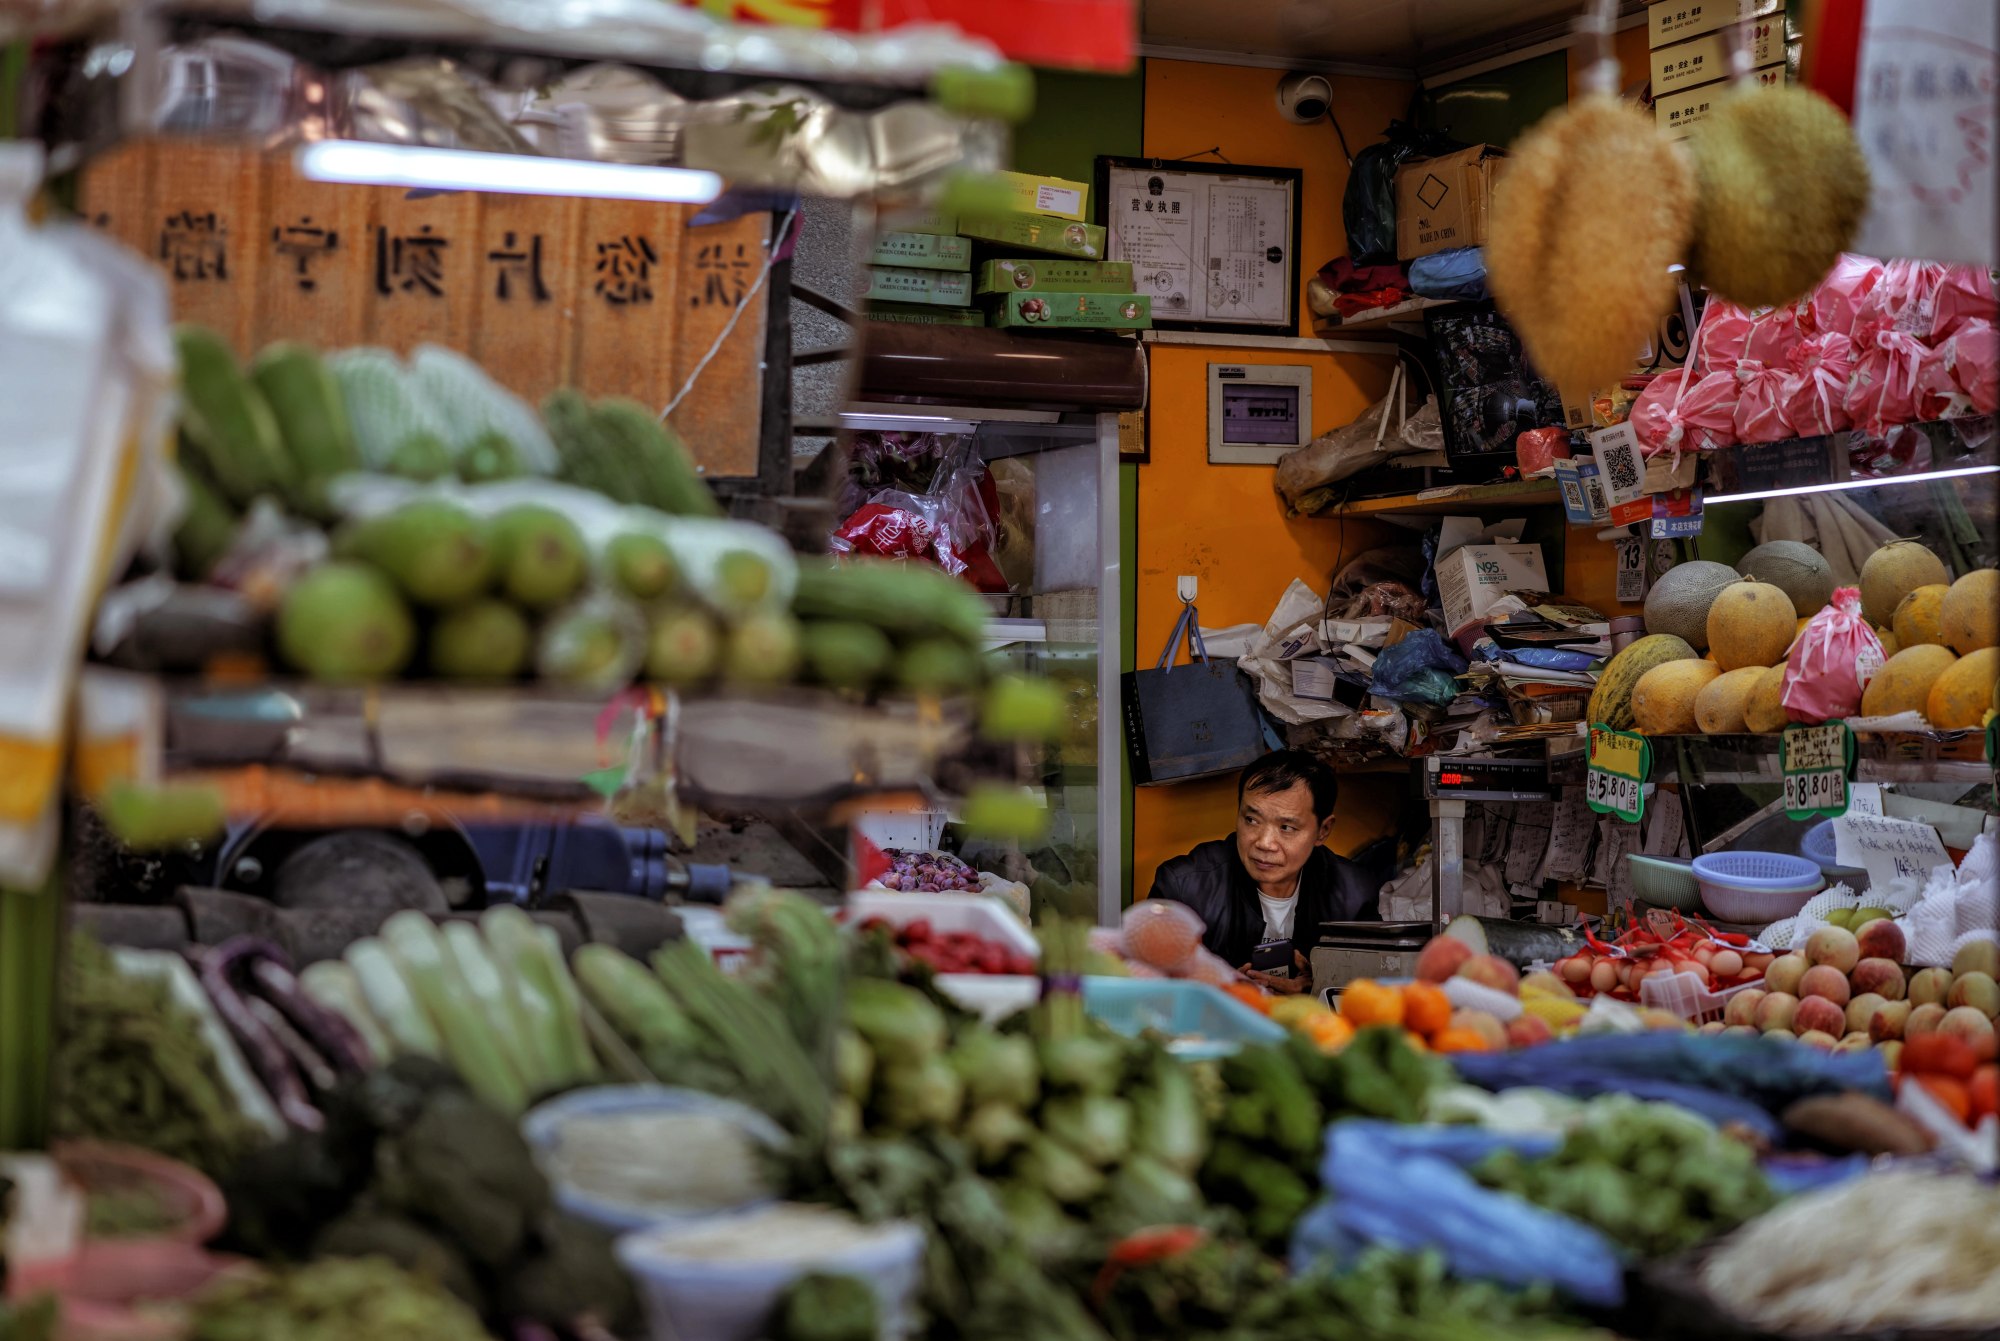 A man sells fruits and vegetables in a street shop, in Shanghai, China. Photo: EPA-EFE